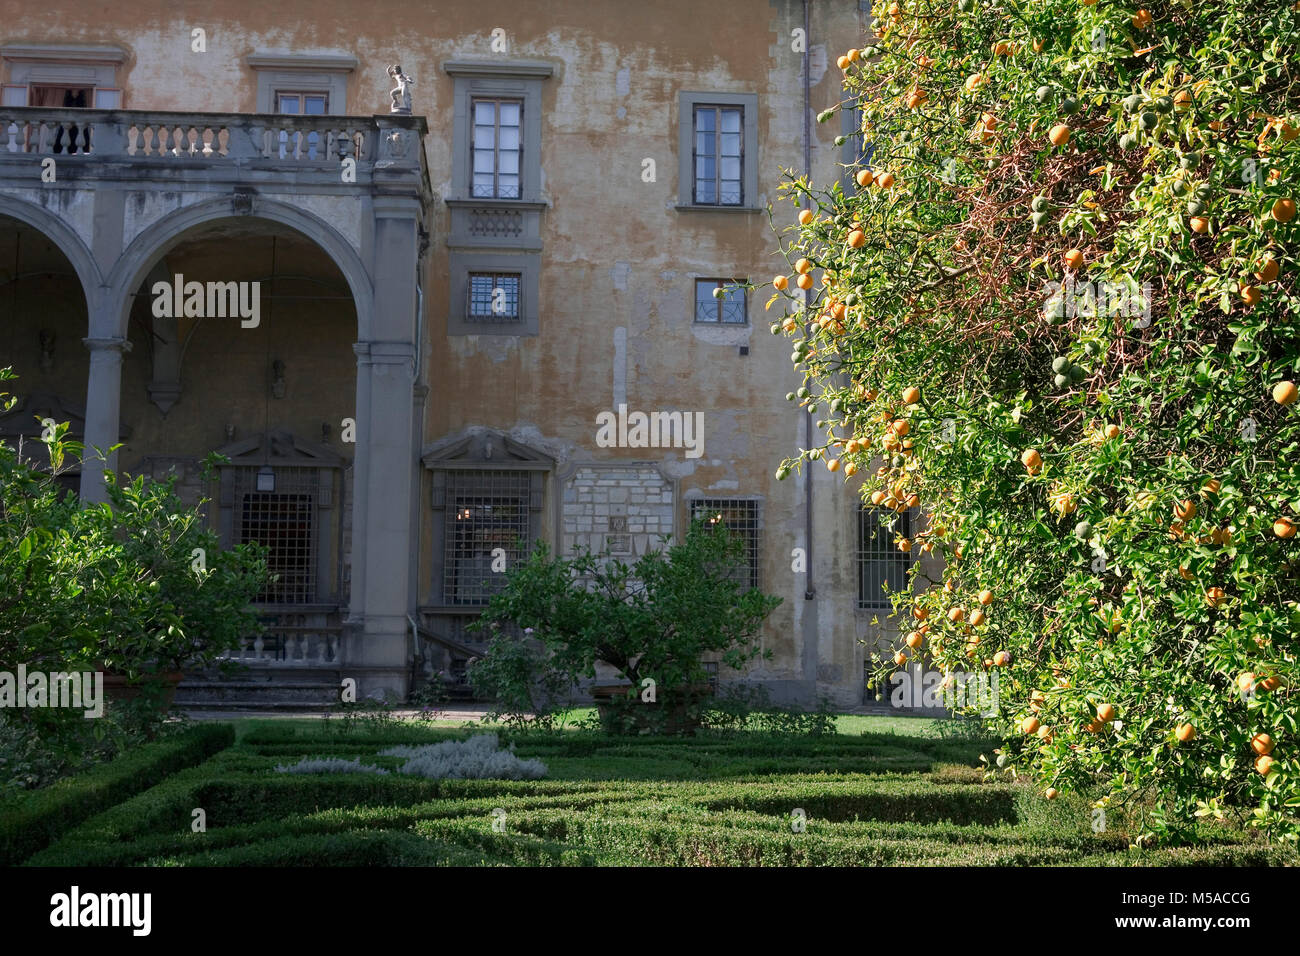 Giardino Corsini al Prato, Florence, Tuscany, Italy: view of the palace across the box hedging with a lemon tree in the foreground Stock Photo